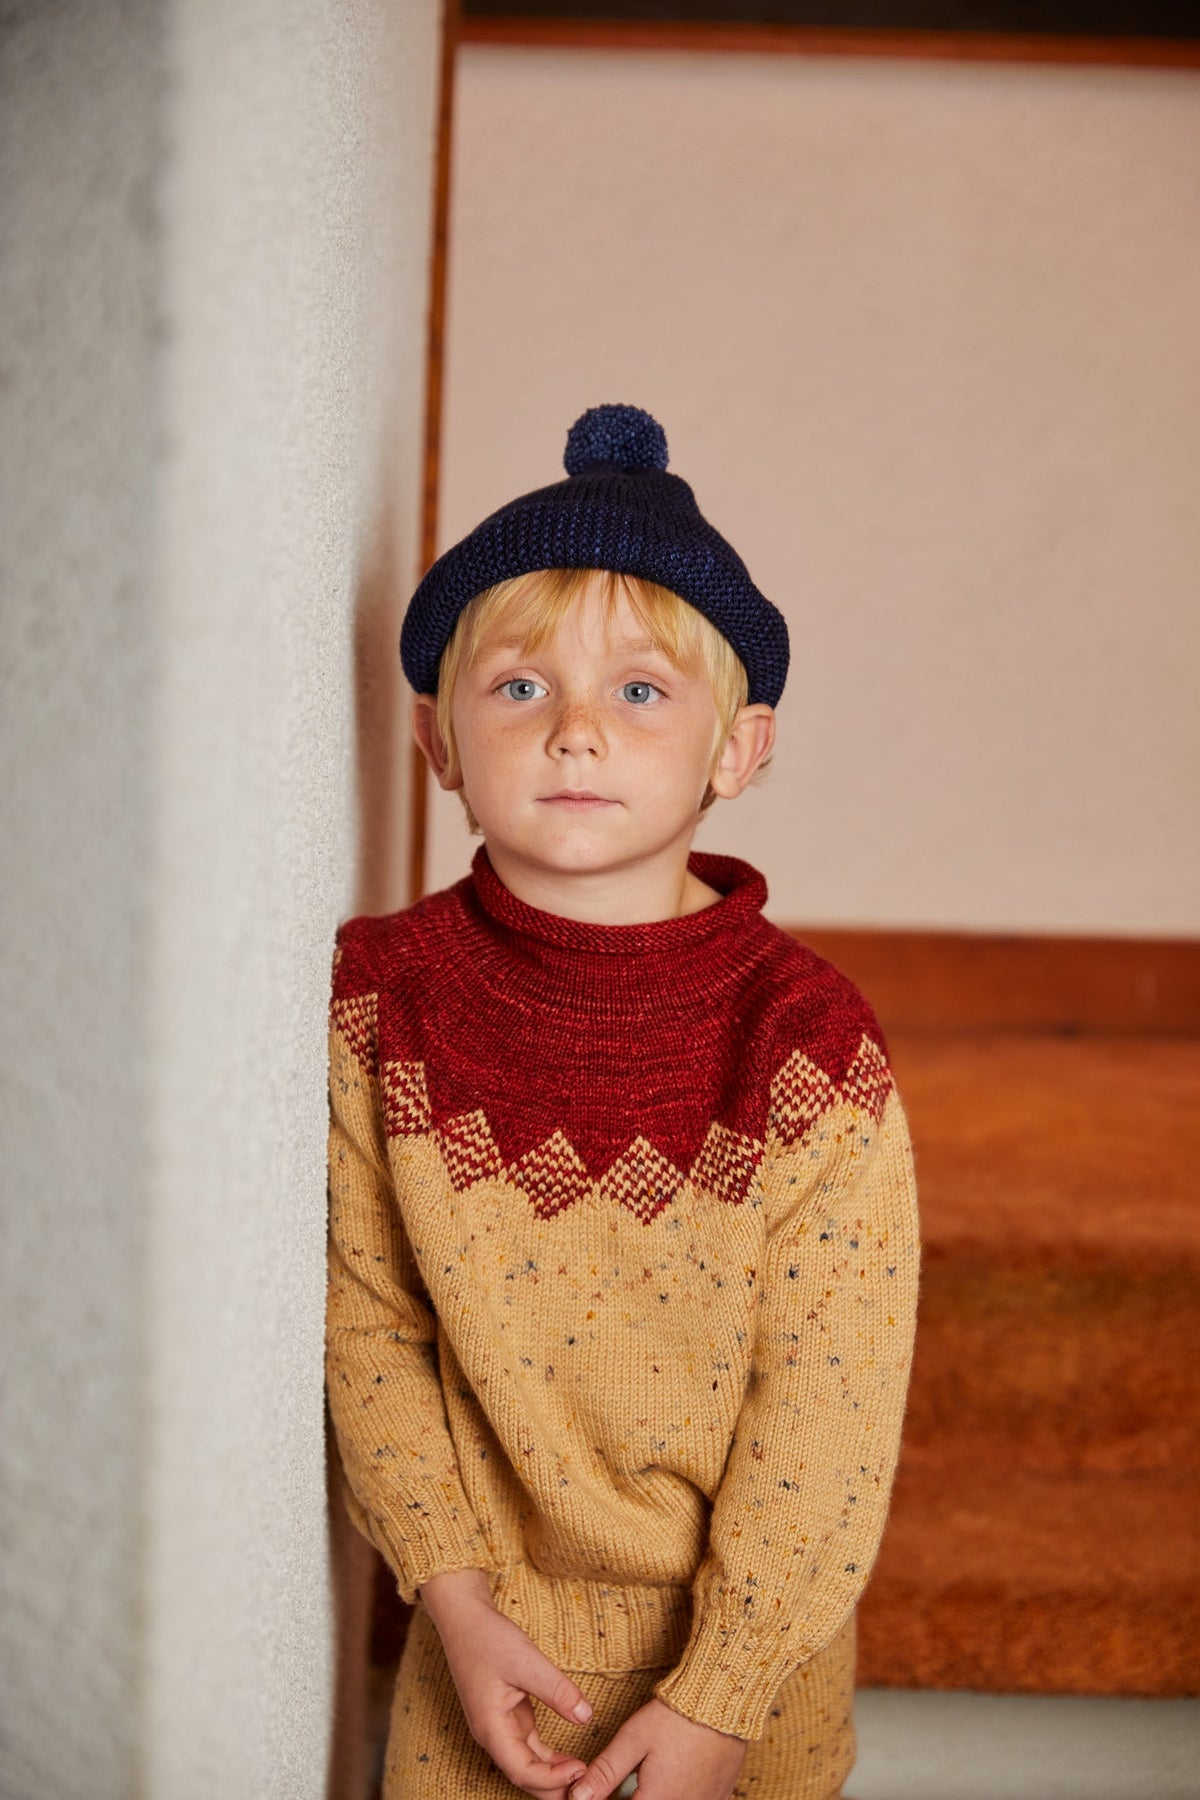 Pinecone Sweater - Camel Confetti+Model is 44 inches tall, 43lbs, wearing a size 4-5y